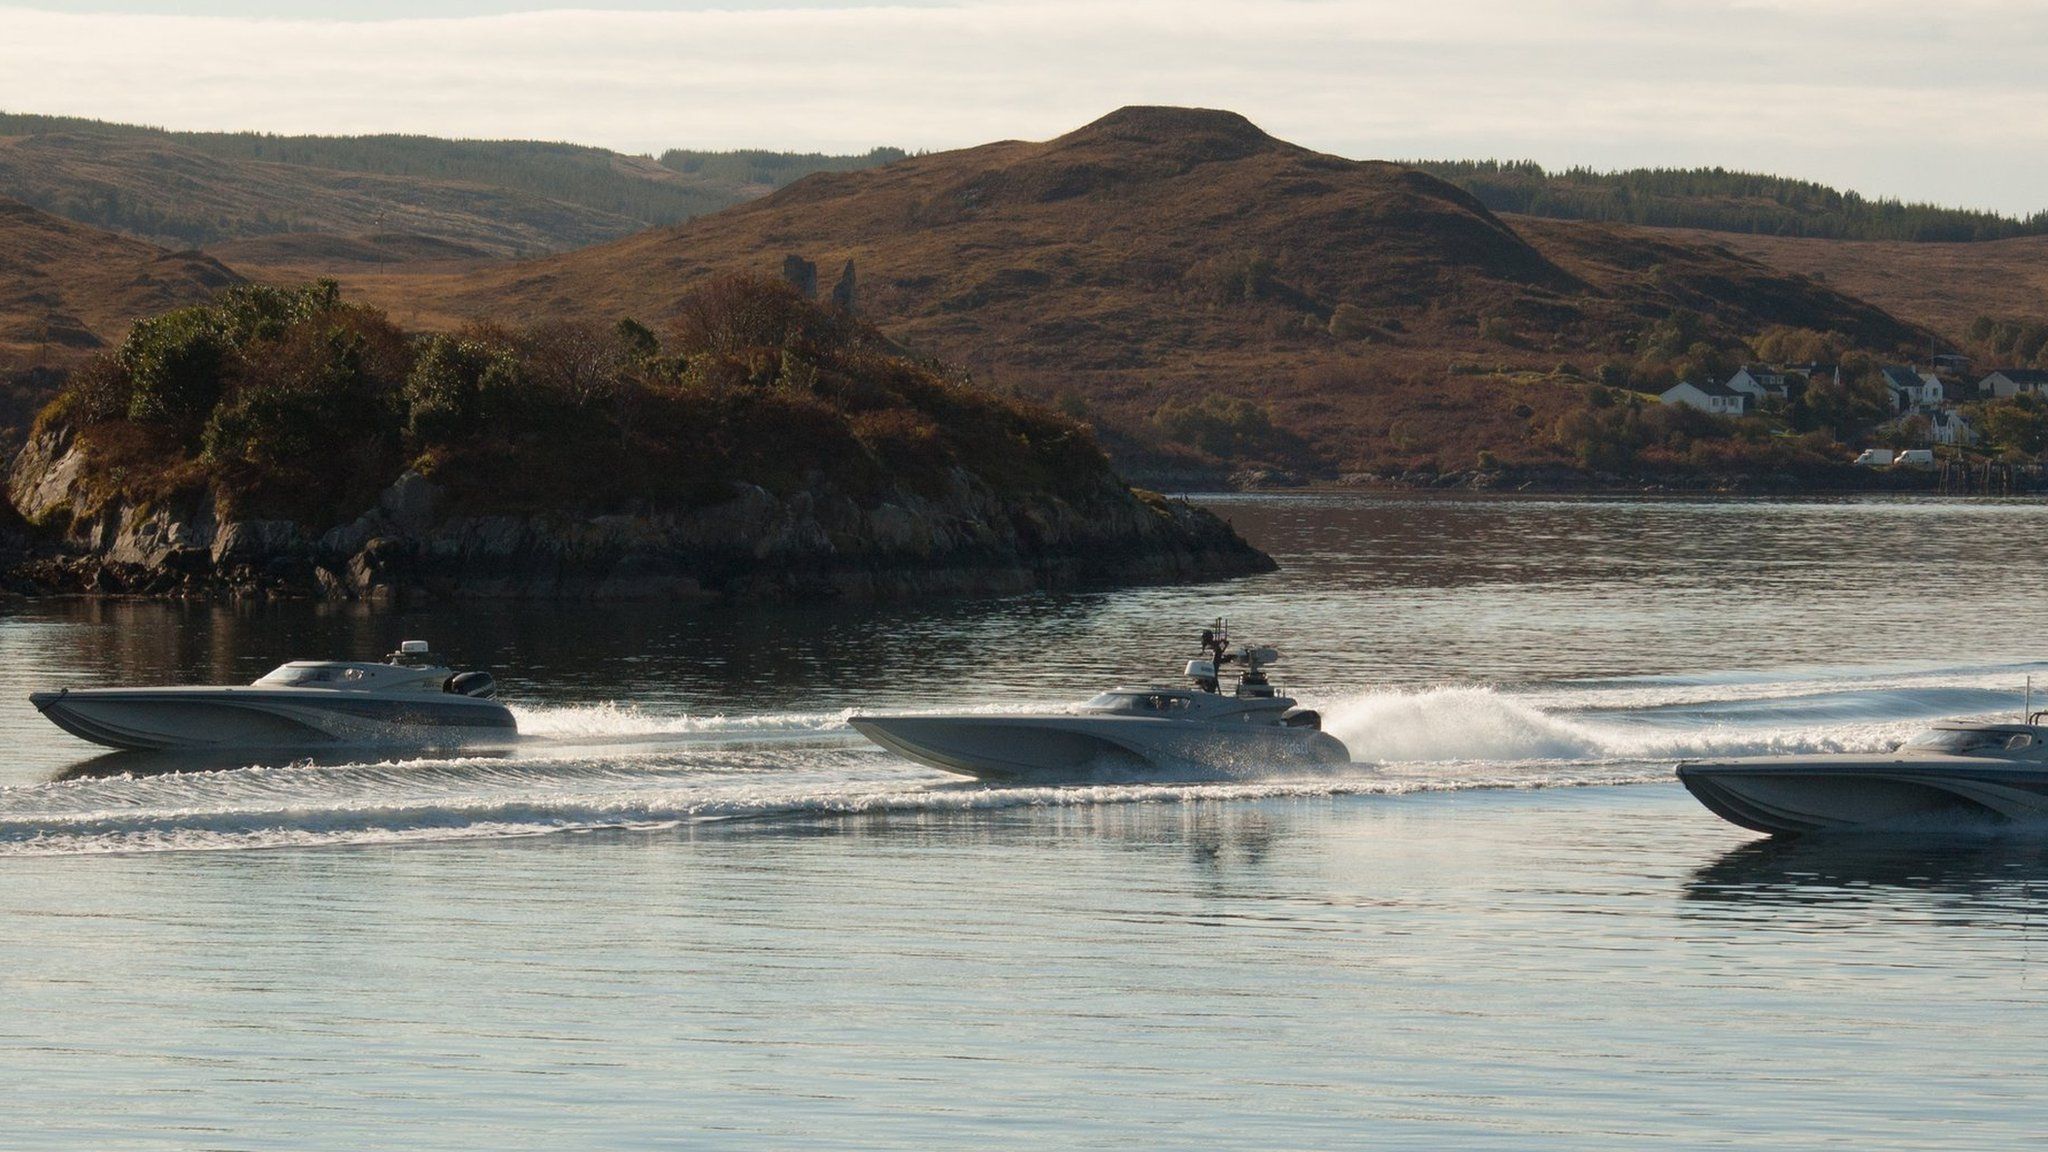 Unmanned Warrior boats